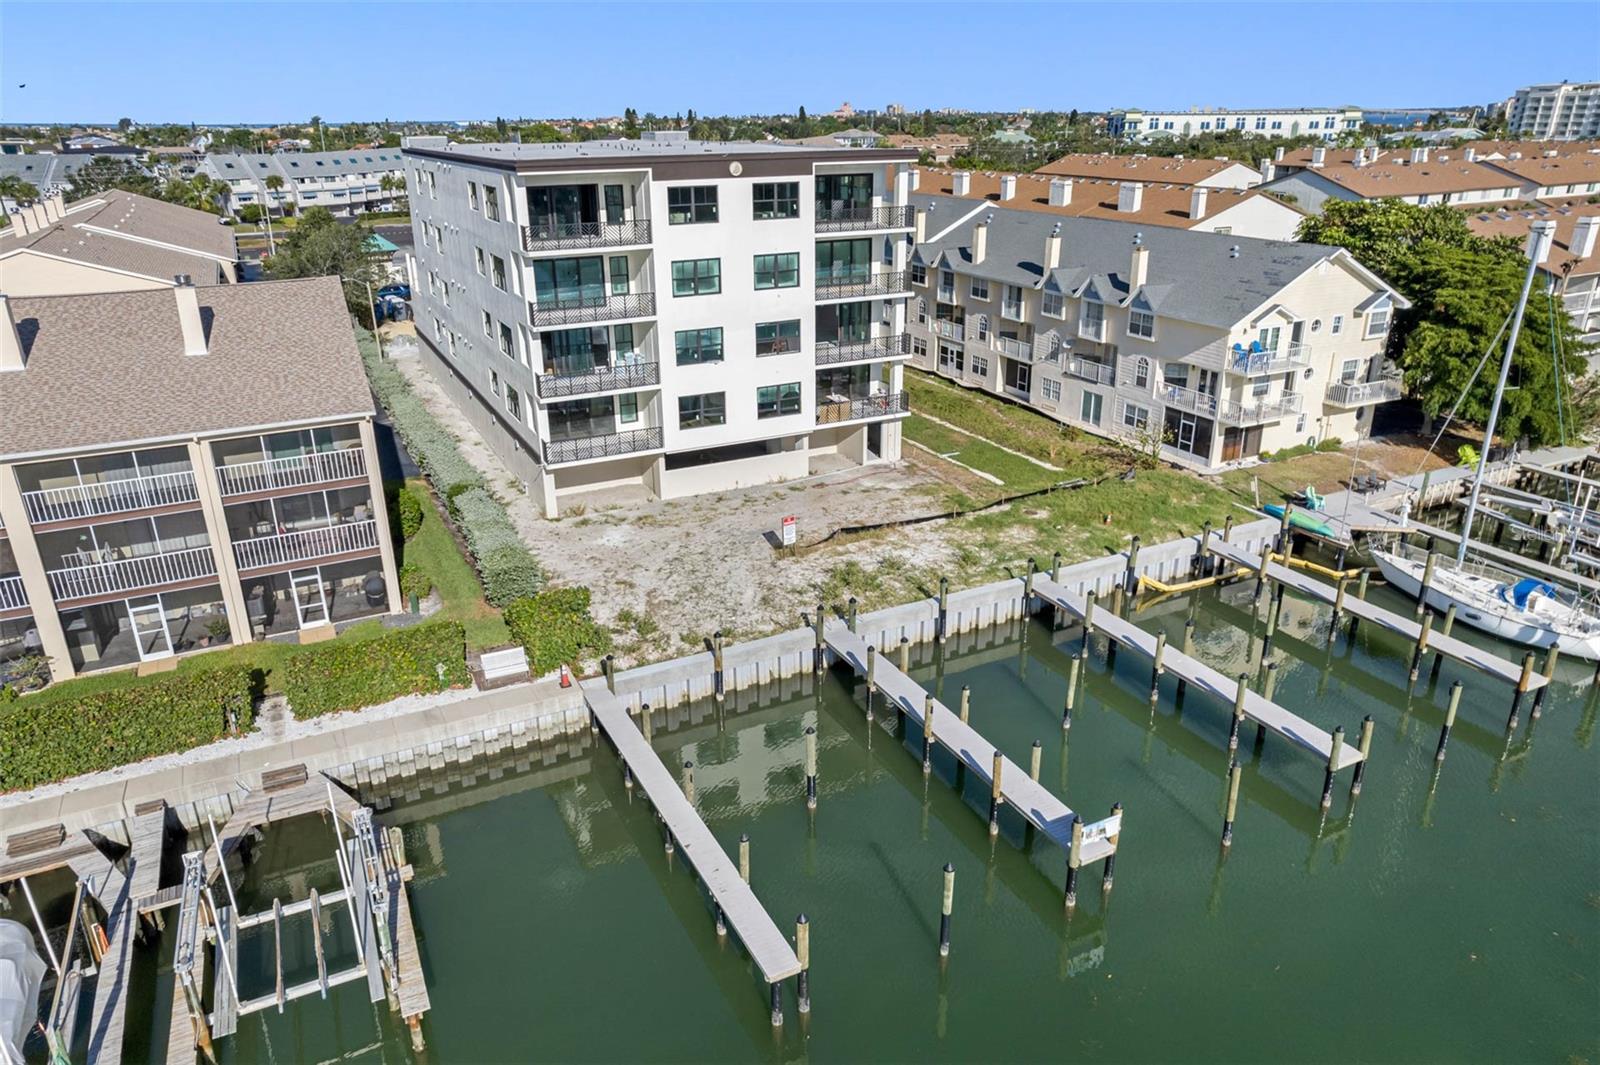 The boat slips are 50' long. 12' width without a boat lift. 10.4' with a boat lift. Electricity can accommodate up to a 35,000 lb boat lift. The land between the boat dock and building will be a tropical pool and lanai oasis.